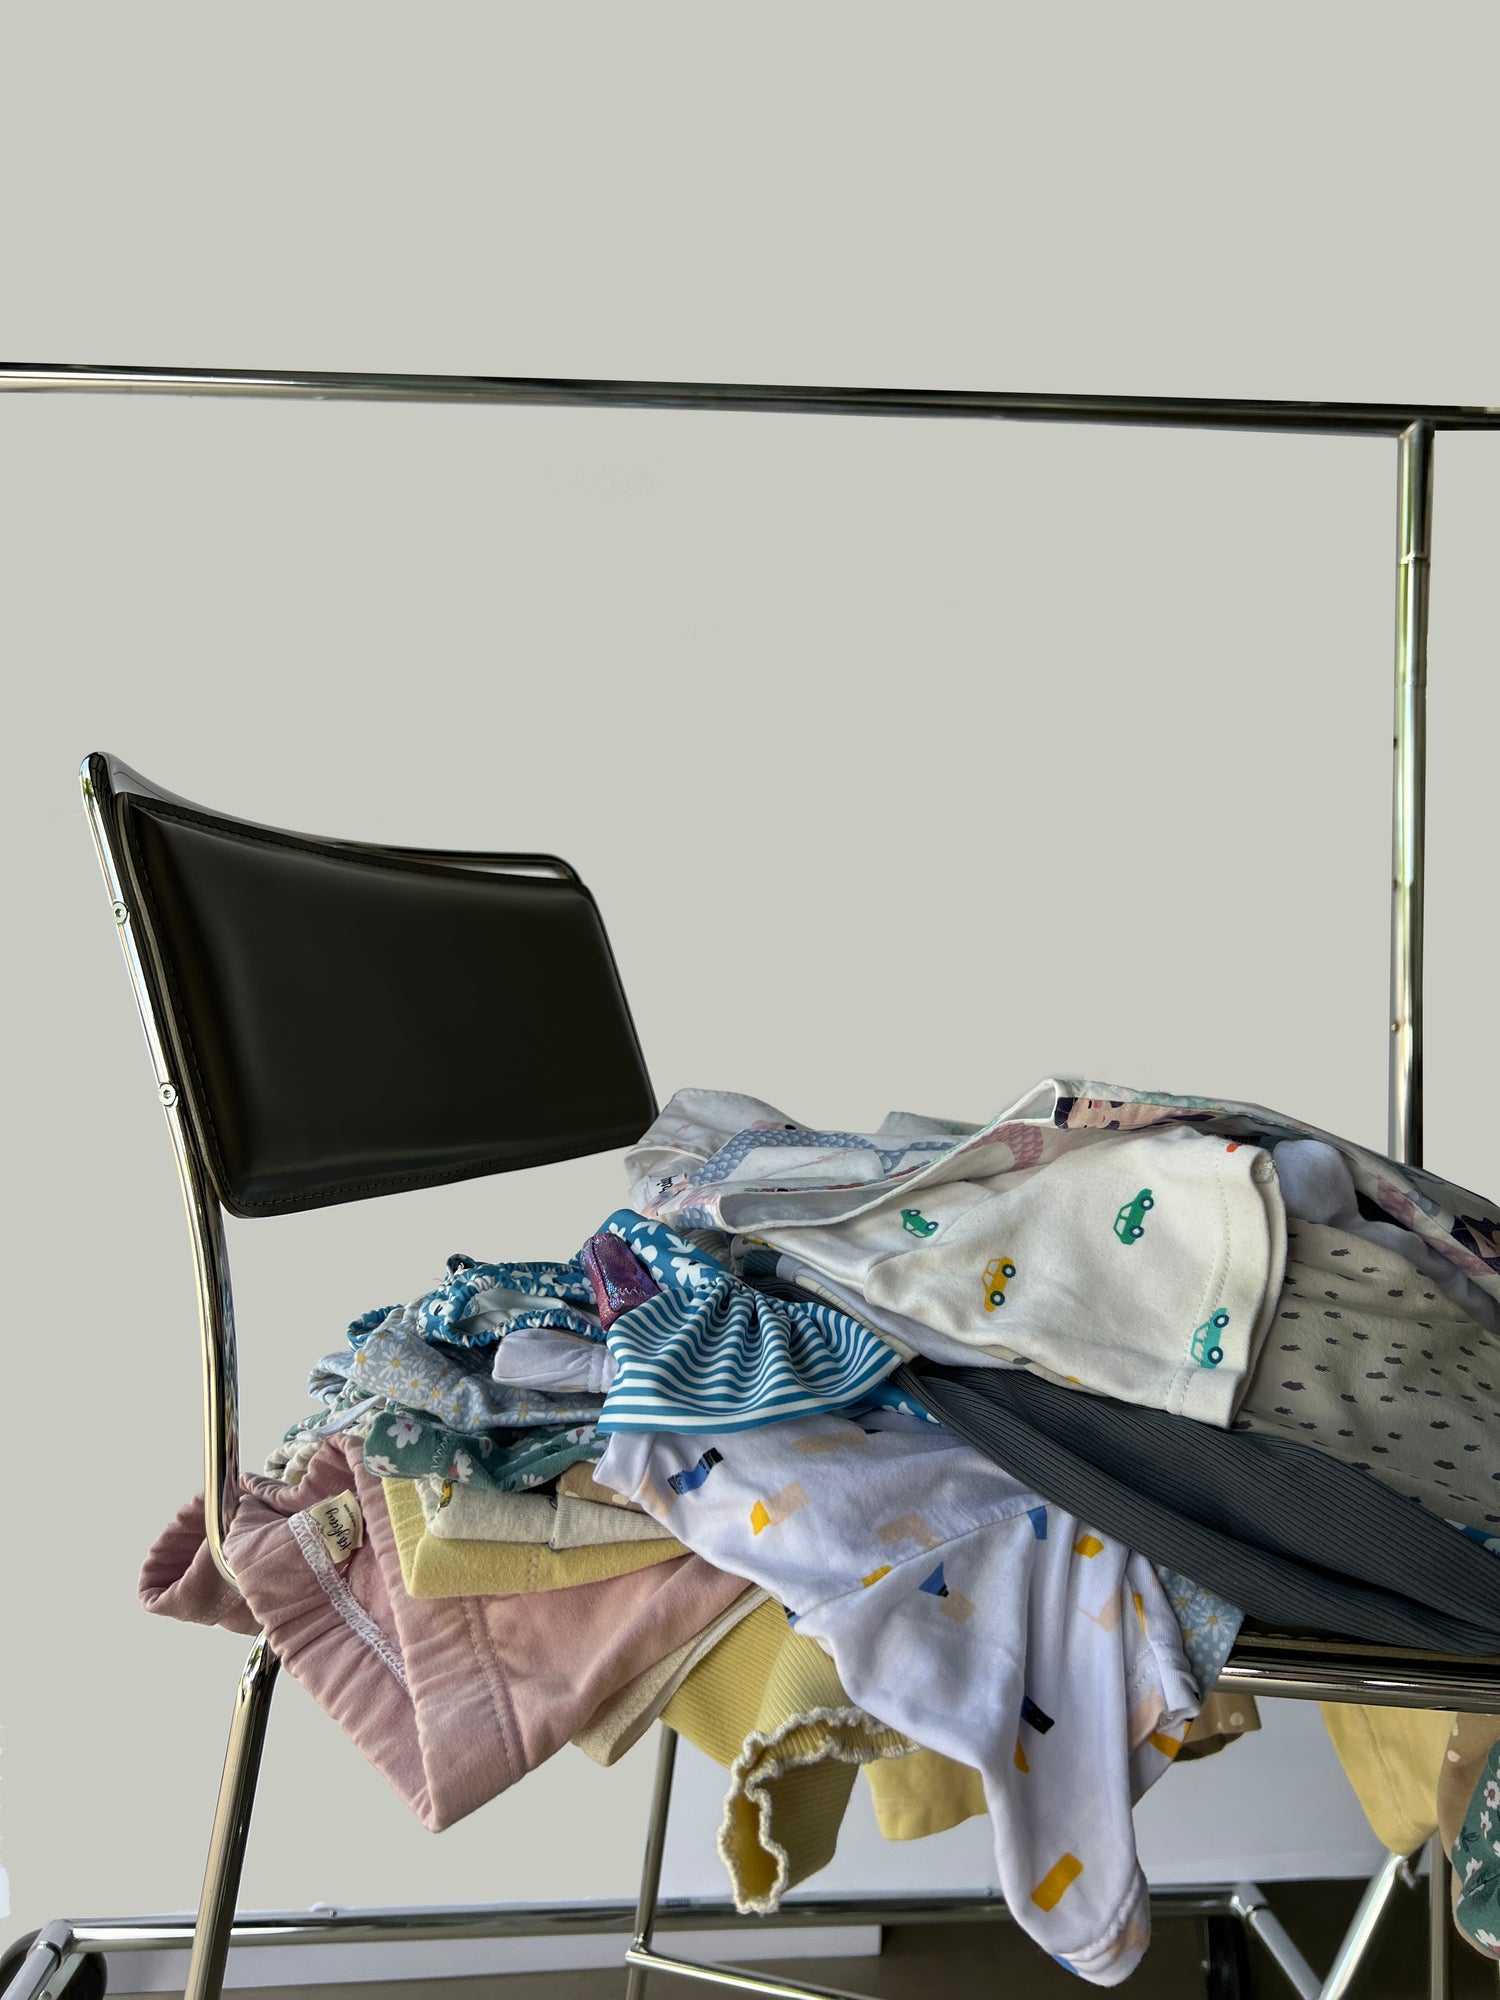 A pile of children's clothing layin on top of a tall chair with black back rest. In the background is a faded white background and clothing rack.